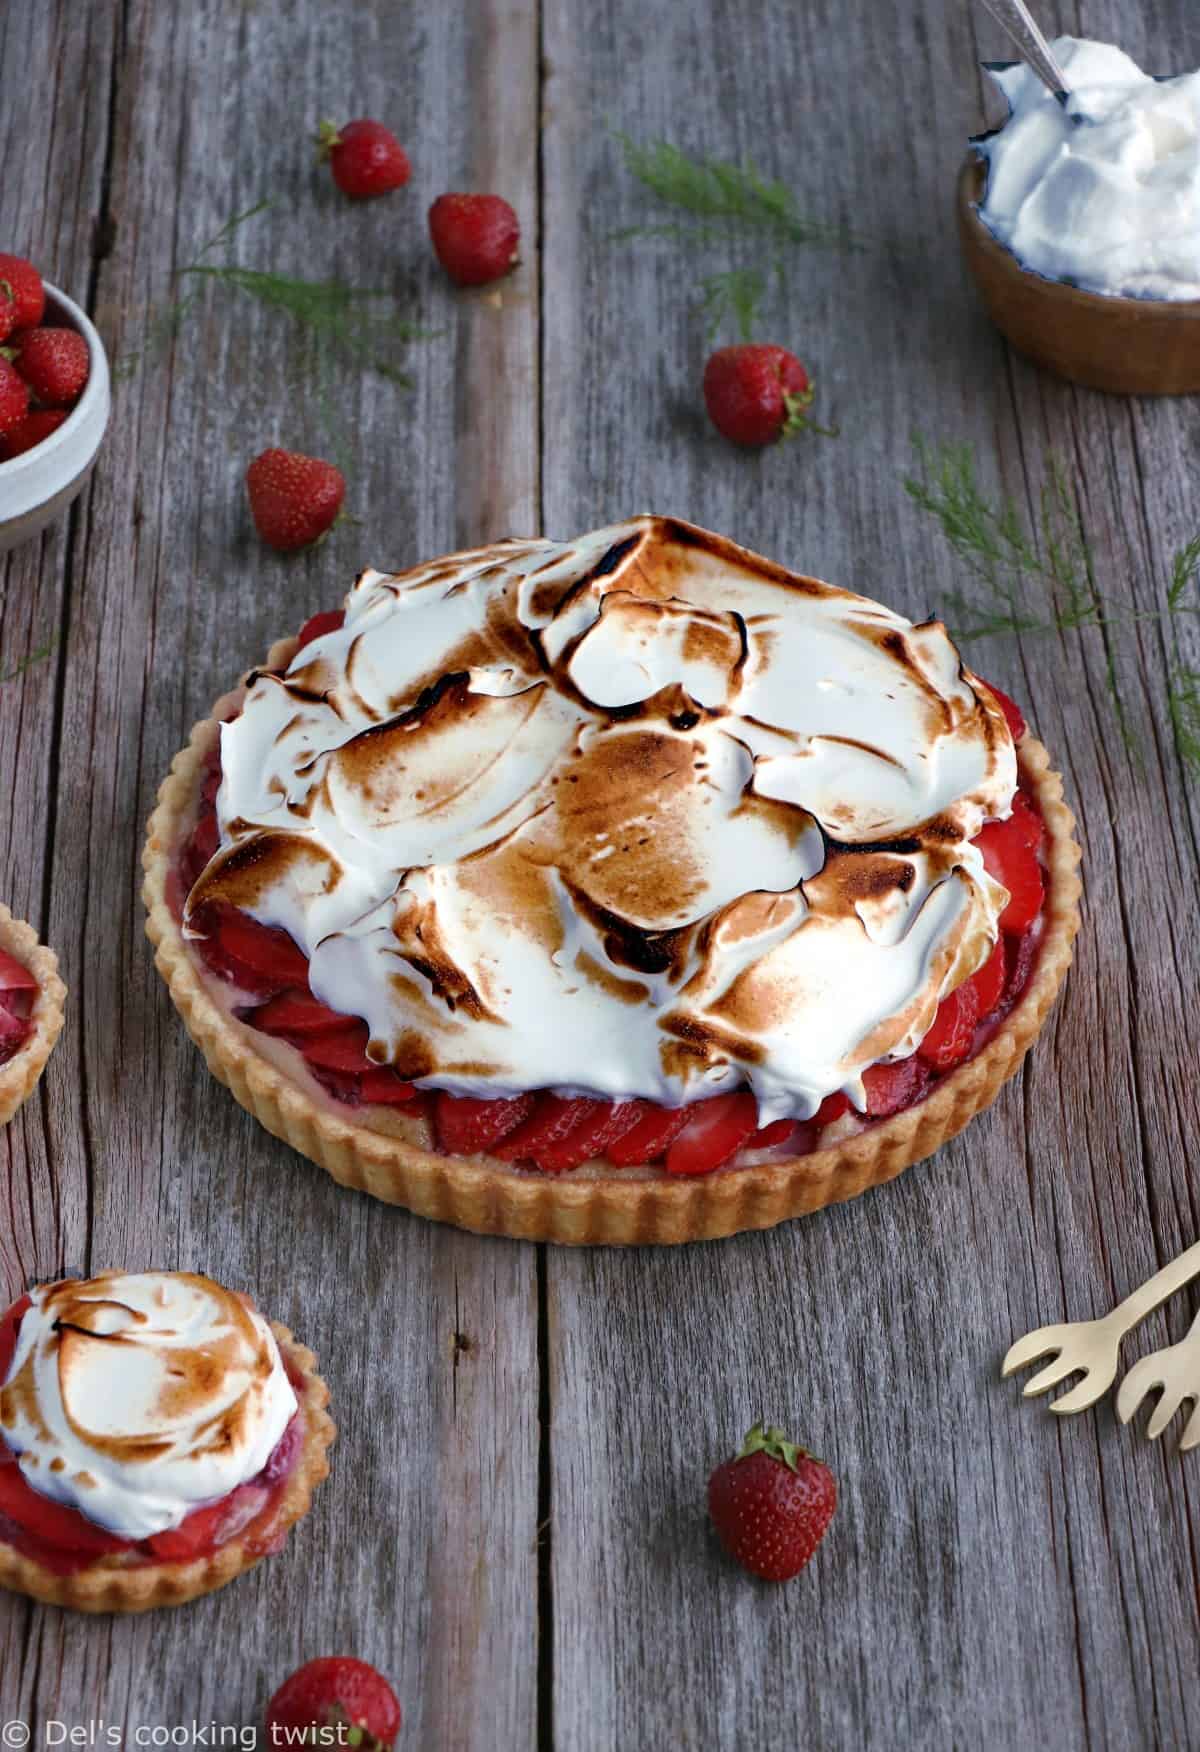 Meringue Strawberry Rhubarb Pie. Beautiful Strawberry Rhubarb Meringue Pie filled with a subtle almond cream is a perfect summer dessert with a great balance of sweetness and tartness. Simply delicious!